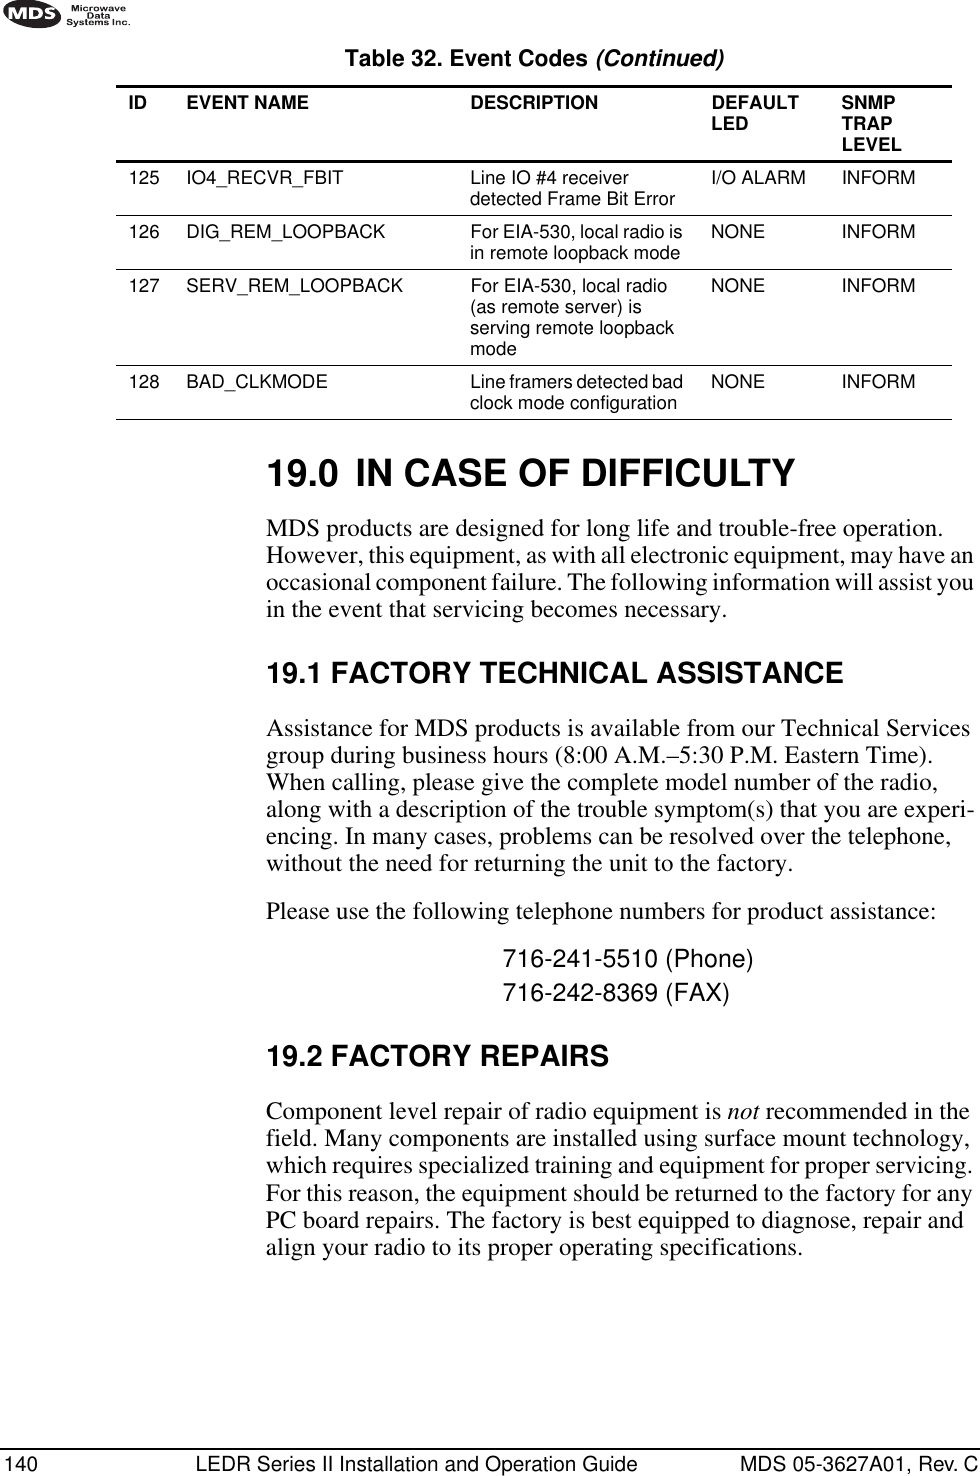 140 LEDR Series II Installation and Operation Guide MDS 05-3627A01, Rev. C19.0 IN CASE OF DIFFICULTYMDS products are designed for long life and trouble-free operation. However, this equipment, as with all electronic equipment, may have an occasional component failure. The following information will assist you in the event that servicing becomes necessary.19.1 FACTORY TECHNICAL ASSISTANCEAssistance for MDS products is available from our Technical Services group during business hours (8:00 A.M.–5:30 P.M. Eastern Time). When calling, please give the complete model number of the radio, along with a description of the trouble symptom(s) that you are experi-encing. In many cases, problems can be resolved over the telephone, without the need for returning the unit to the factory.Please use the following telephone numbers for product assistance:716-241-5510 (Phone)716-242-8369 (FAX)19.2 FACTORY REPAIRSComponent level repair of radio equipment is not recommended in the field. Many components are installed using surface mount technology, which requires specialized training and equipment for proper servicing. For this reason, the equipment should be returned to the factory for any PC board repairs. The factory is best equipped to diagnose, repair and align your radio to its proper operating specifications.125 IO4_RECVR_FBIT Line IO #4 receiver detected Frame Bit Error I/O ALARM INFORM126 DIG_REM_LOOPBACK For EIA-530, local radio is in remote loopback mode NONE INFORM127 SERV_REM_LOOPBACK For EIA-530, local radio (as remote server) is serving remote loopback modeNONE INFORM128 BAD_CLKMODE Line framers detected bad clock mode configuration NONE INFORMTable 32. Event Codes (Continued)ID EVENT NAME DESCRIPTION DEFAULTLED SNMP TRAP LEVEL